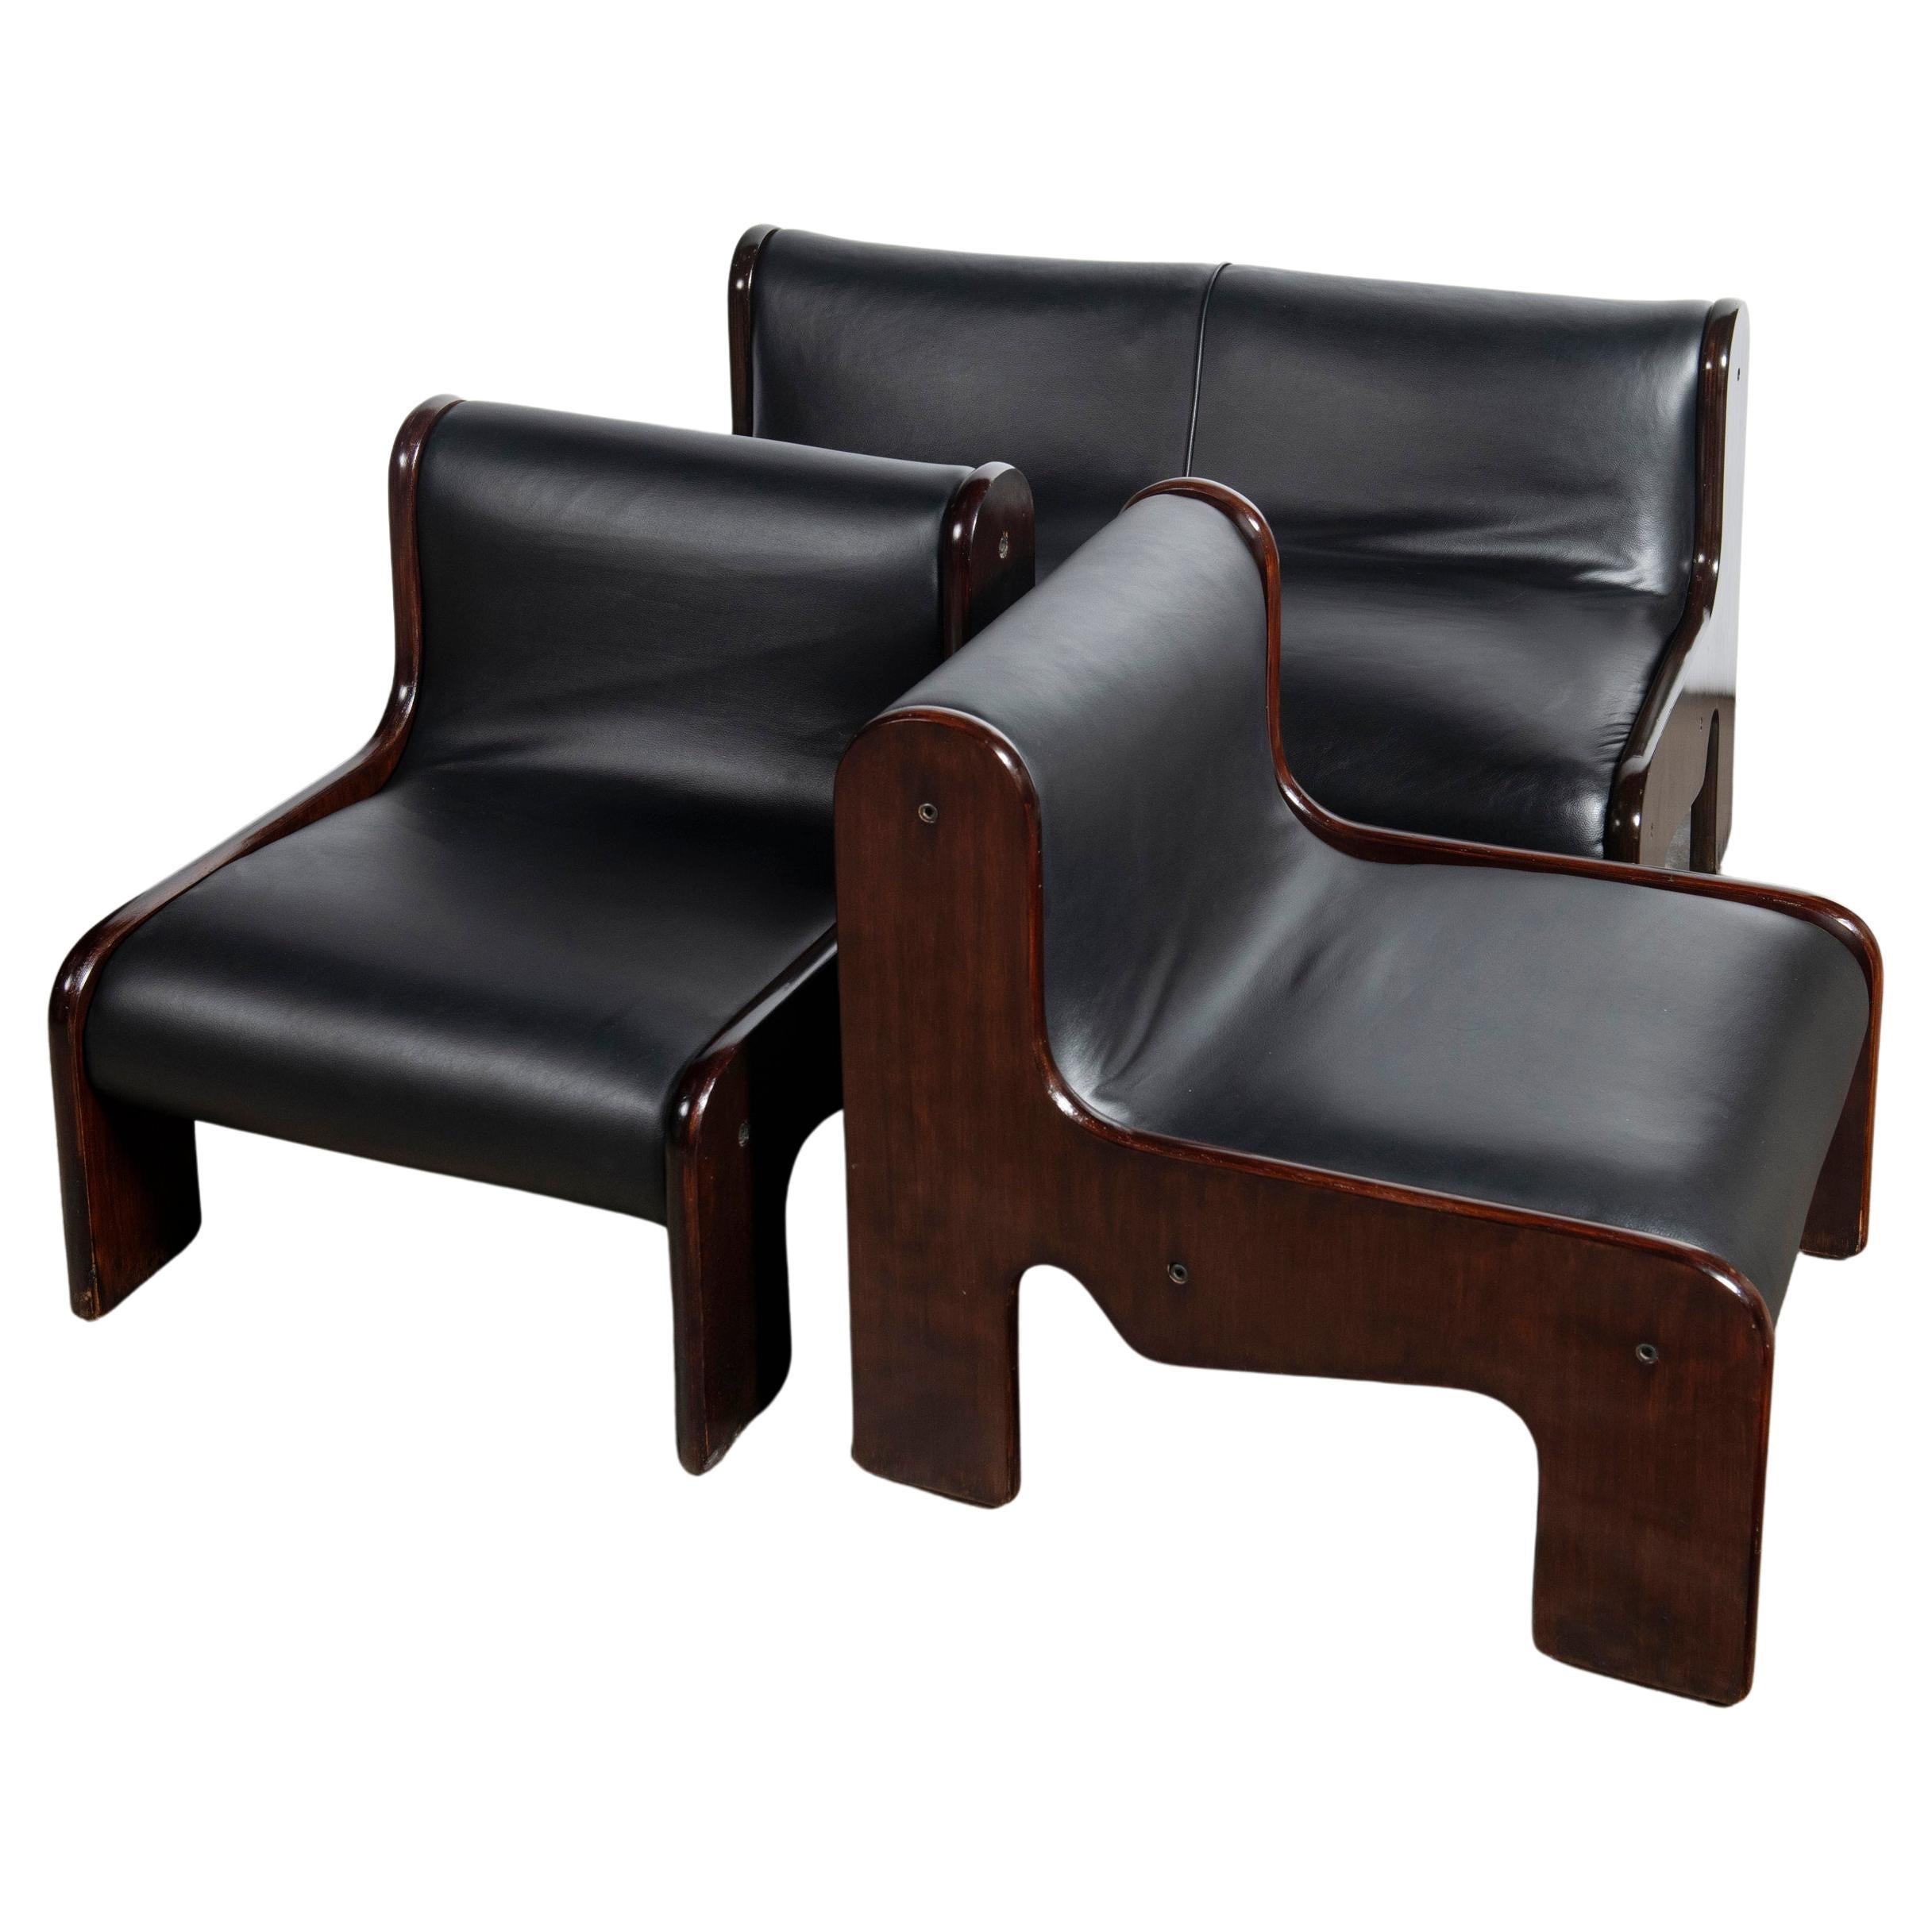 Wood and leather set of 3 LP sofas designed by Ricardo Blanco, Argentina, 1970. For Sale